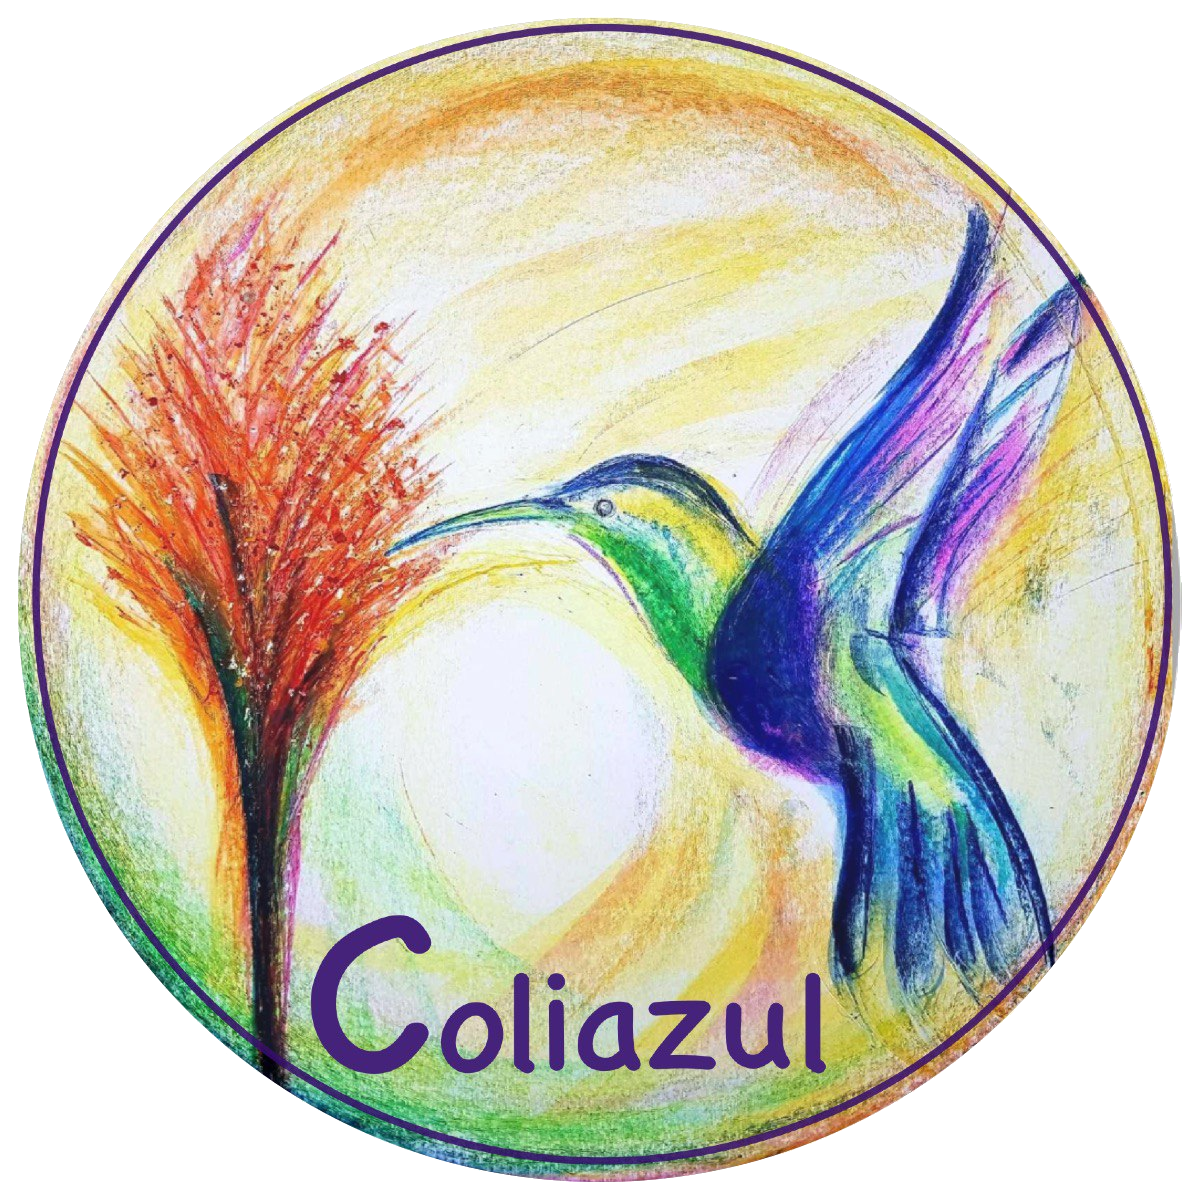 Coliazul Community Project